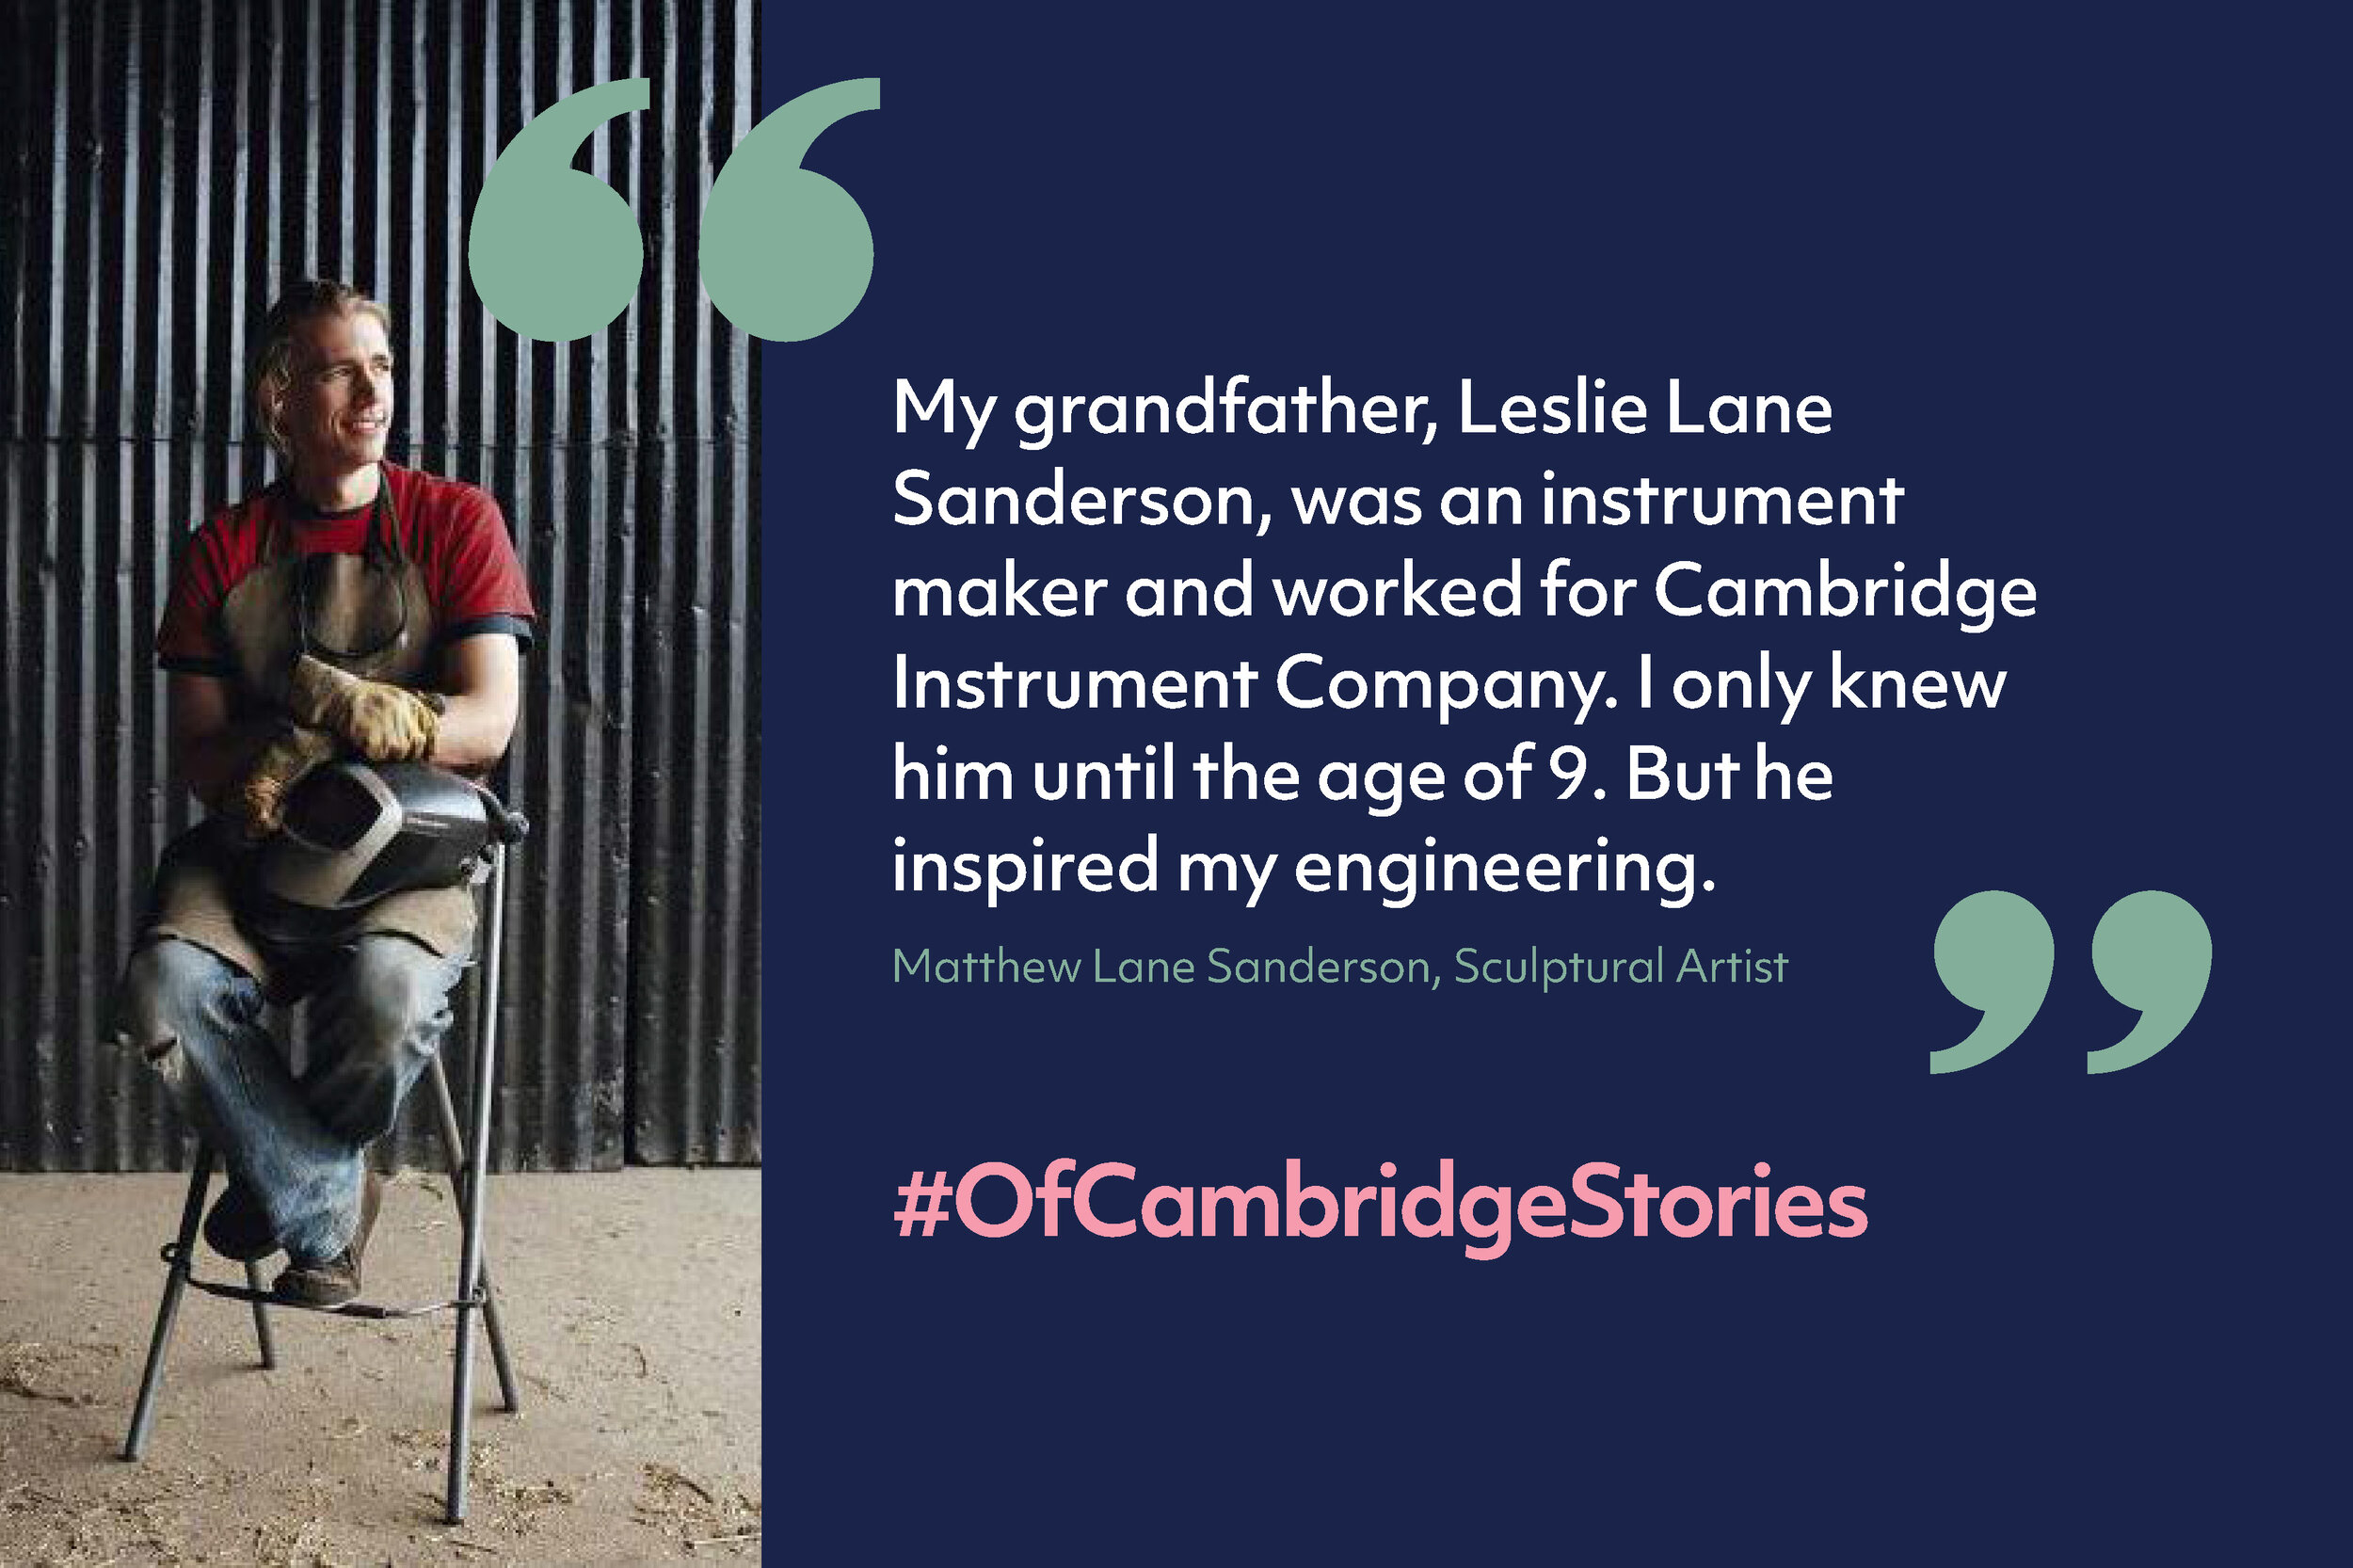 KOL01527 Of Cambridge Stories Campaign-Twitter v0.1_Page_2.jpg